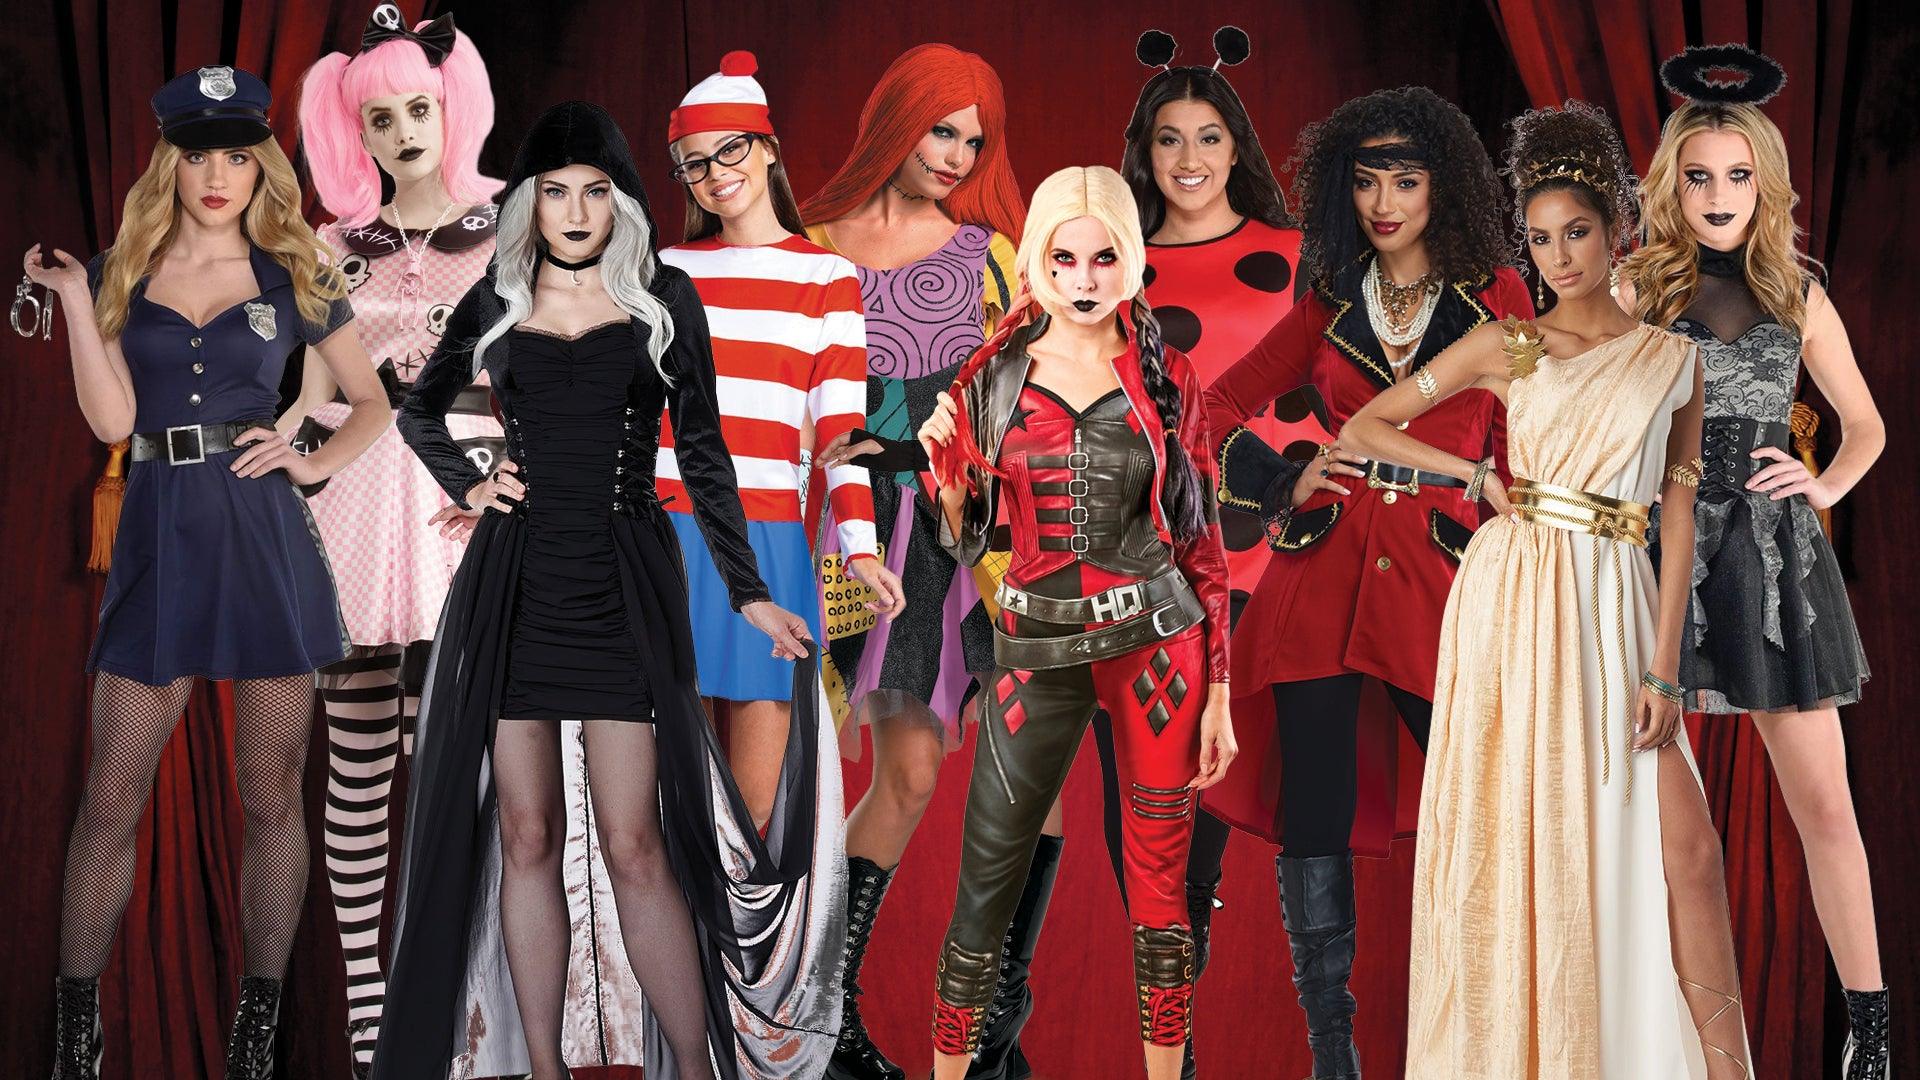 The Best Halloween Costumes for Women in 2022